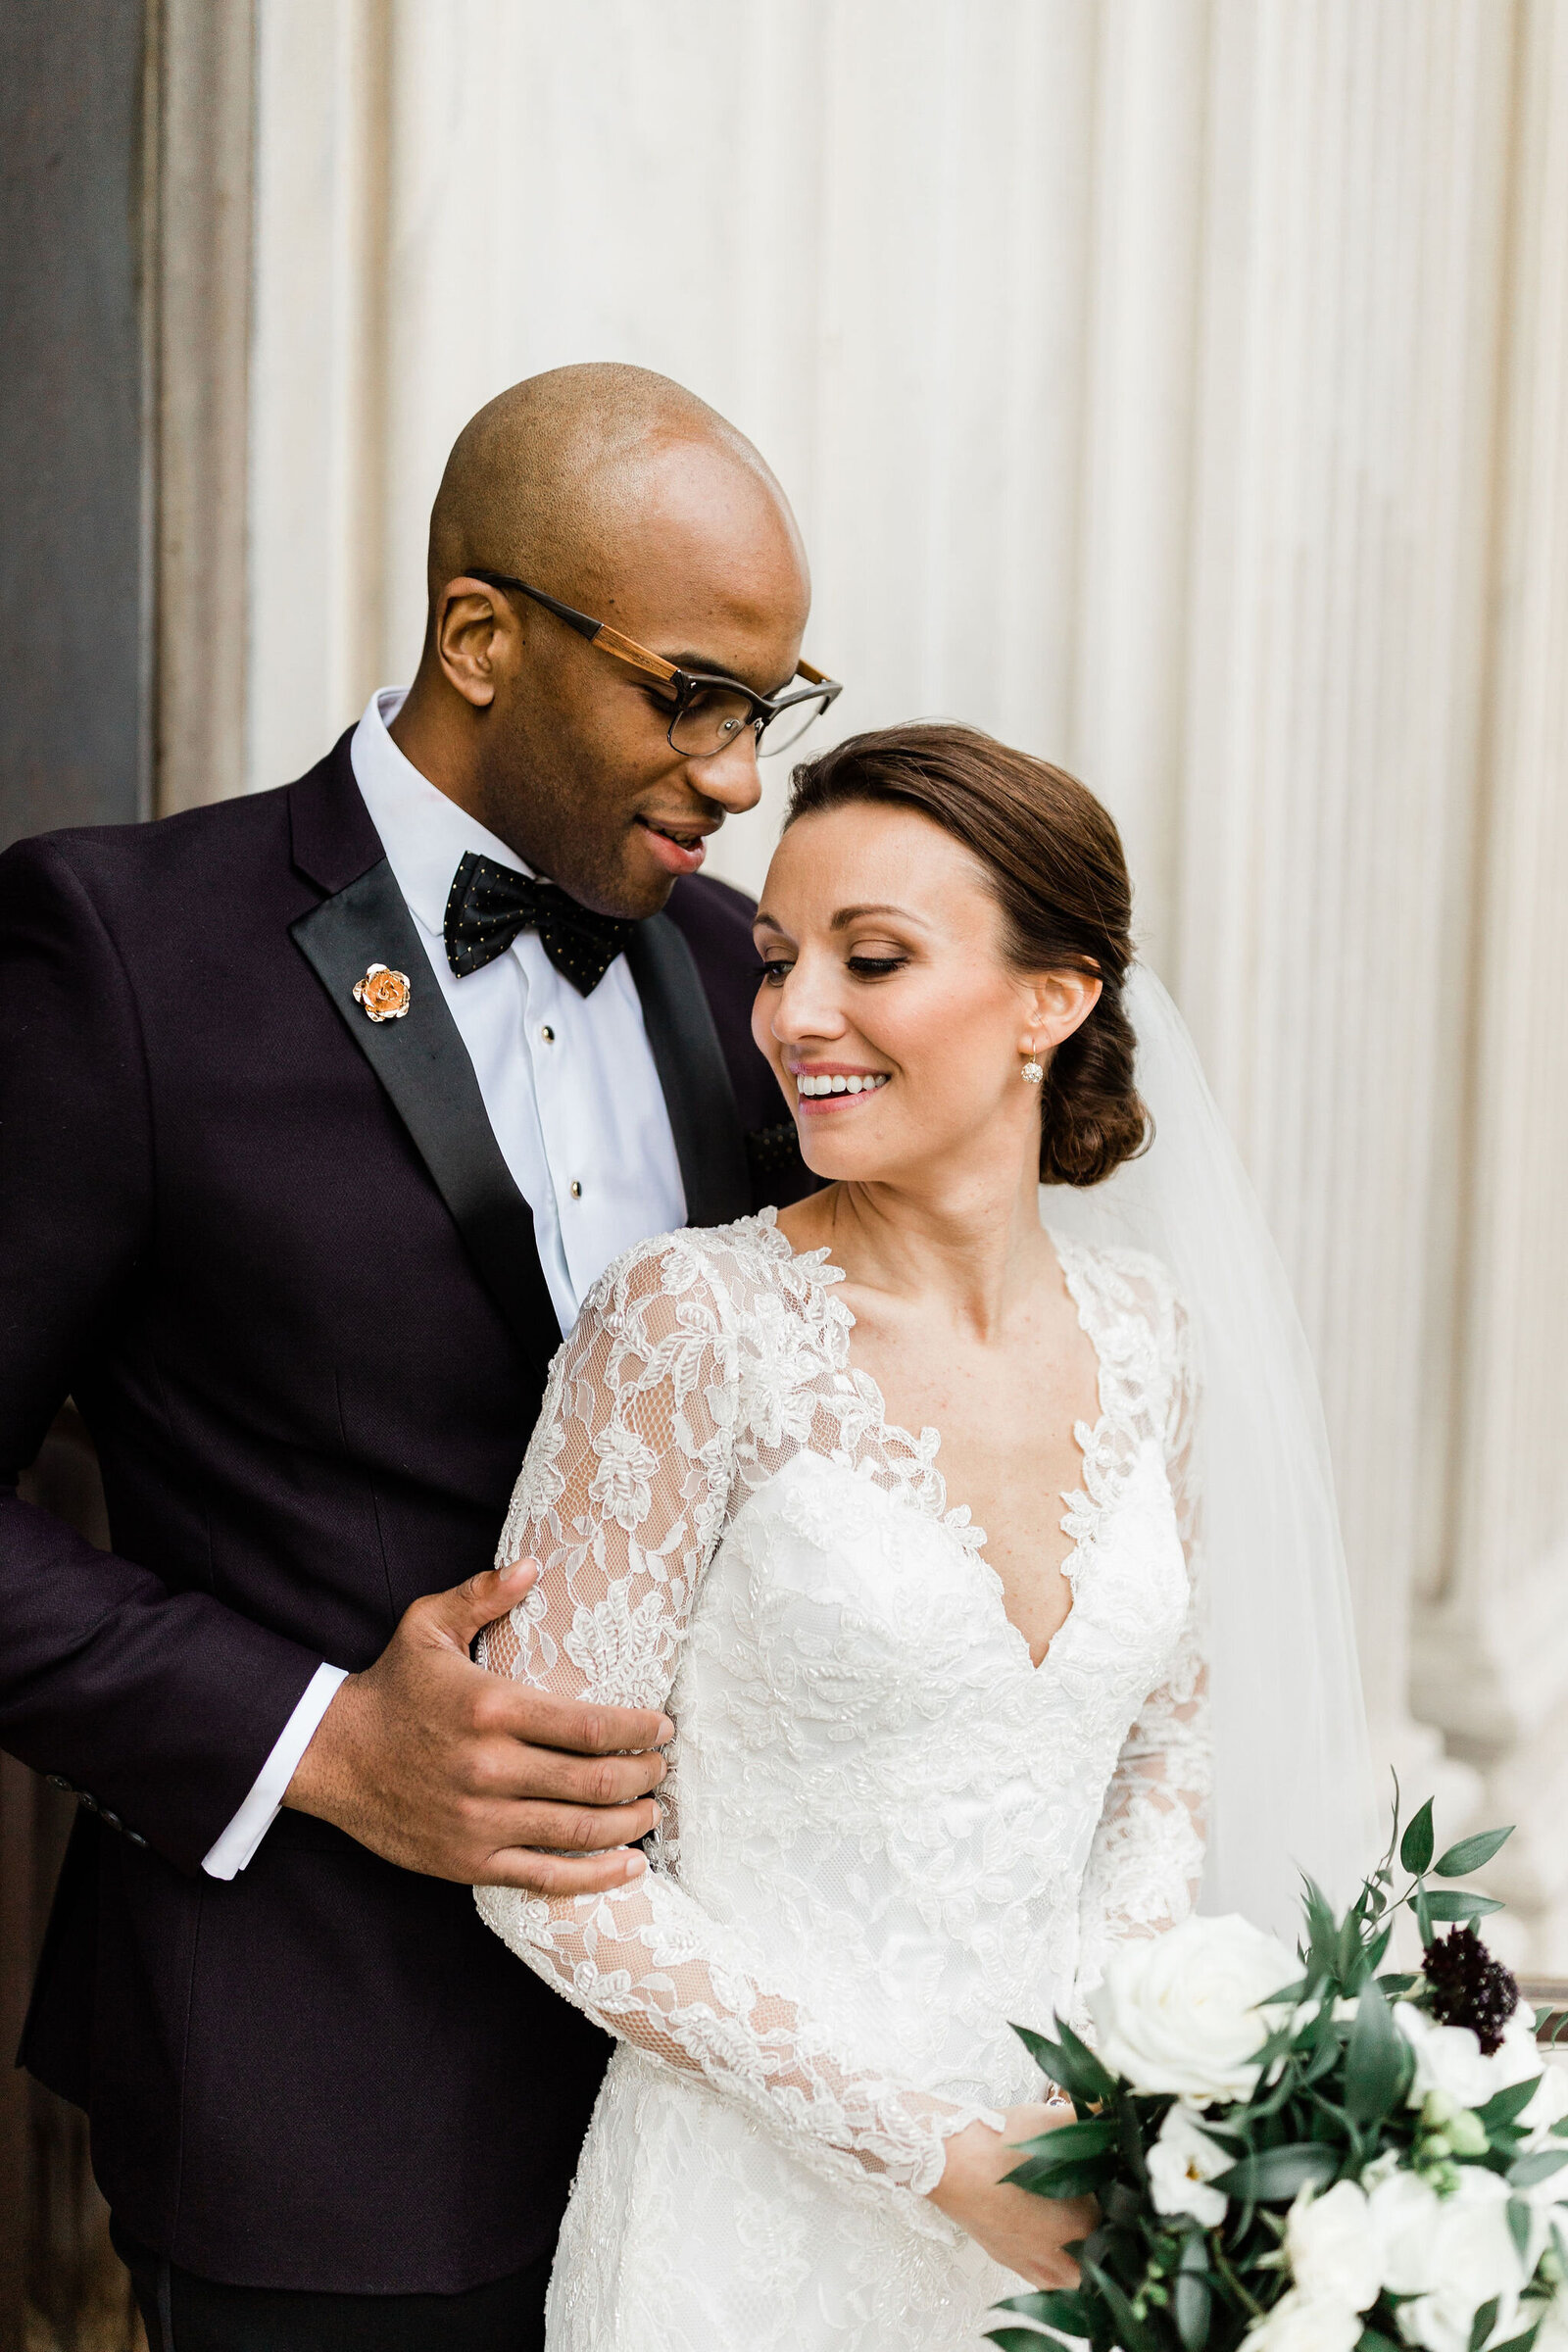 Elegant Wedding Photos | The Peabody Library Baltimore MD | The Axtells Photo and Film